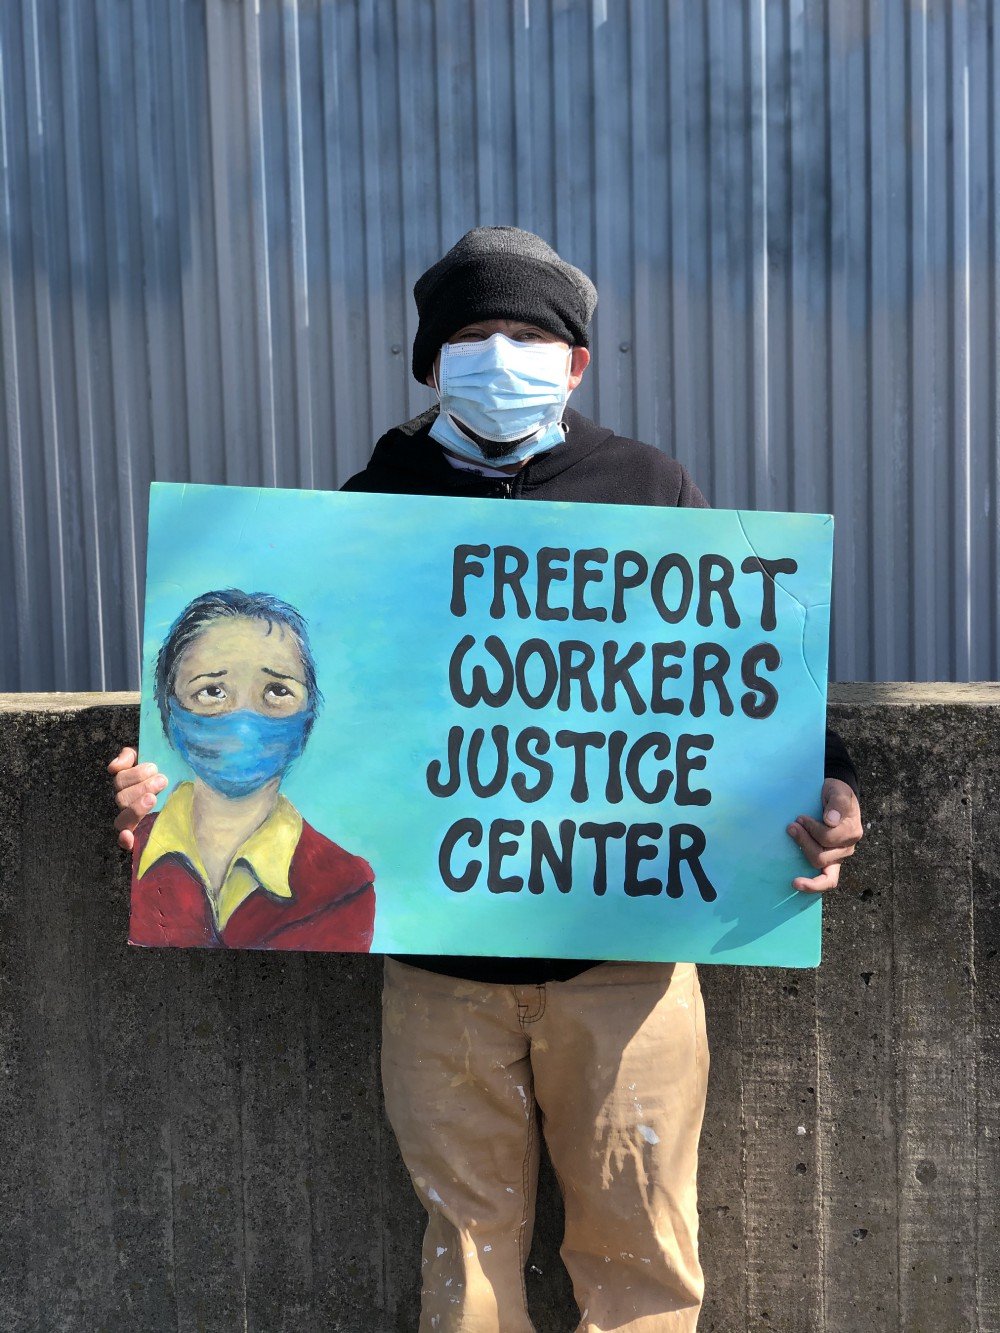 Hector Rodolfo Gomez, 43, a member of Freeport's Workers Justice Center.